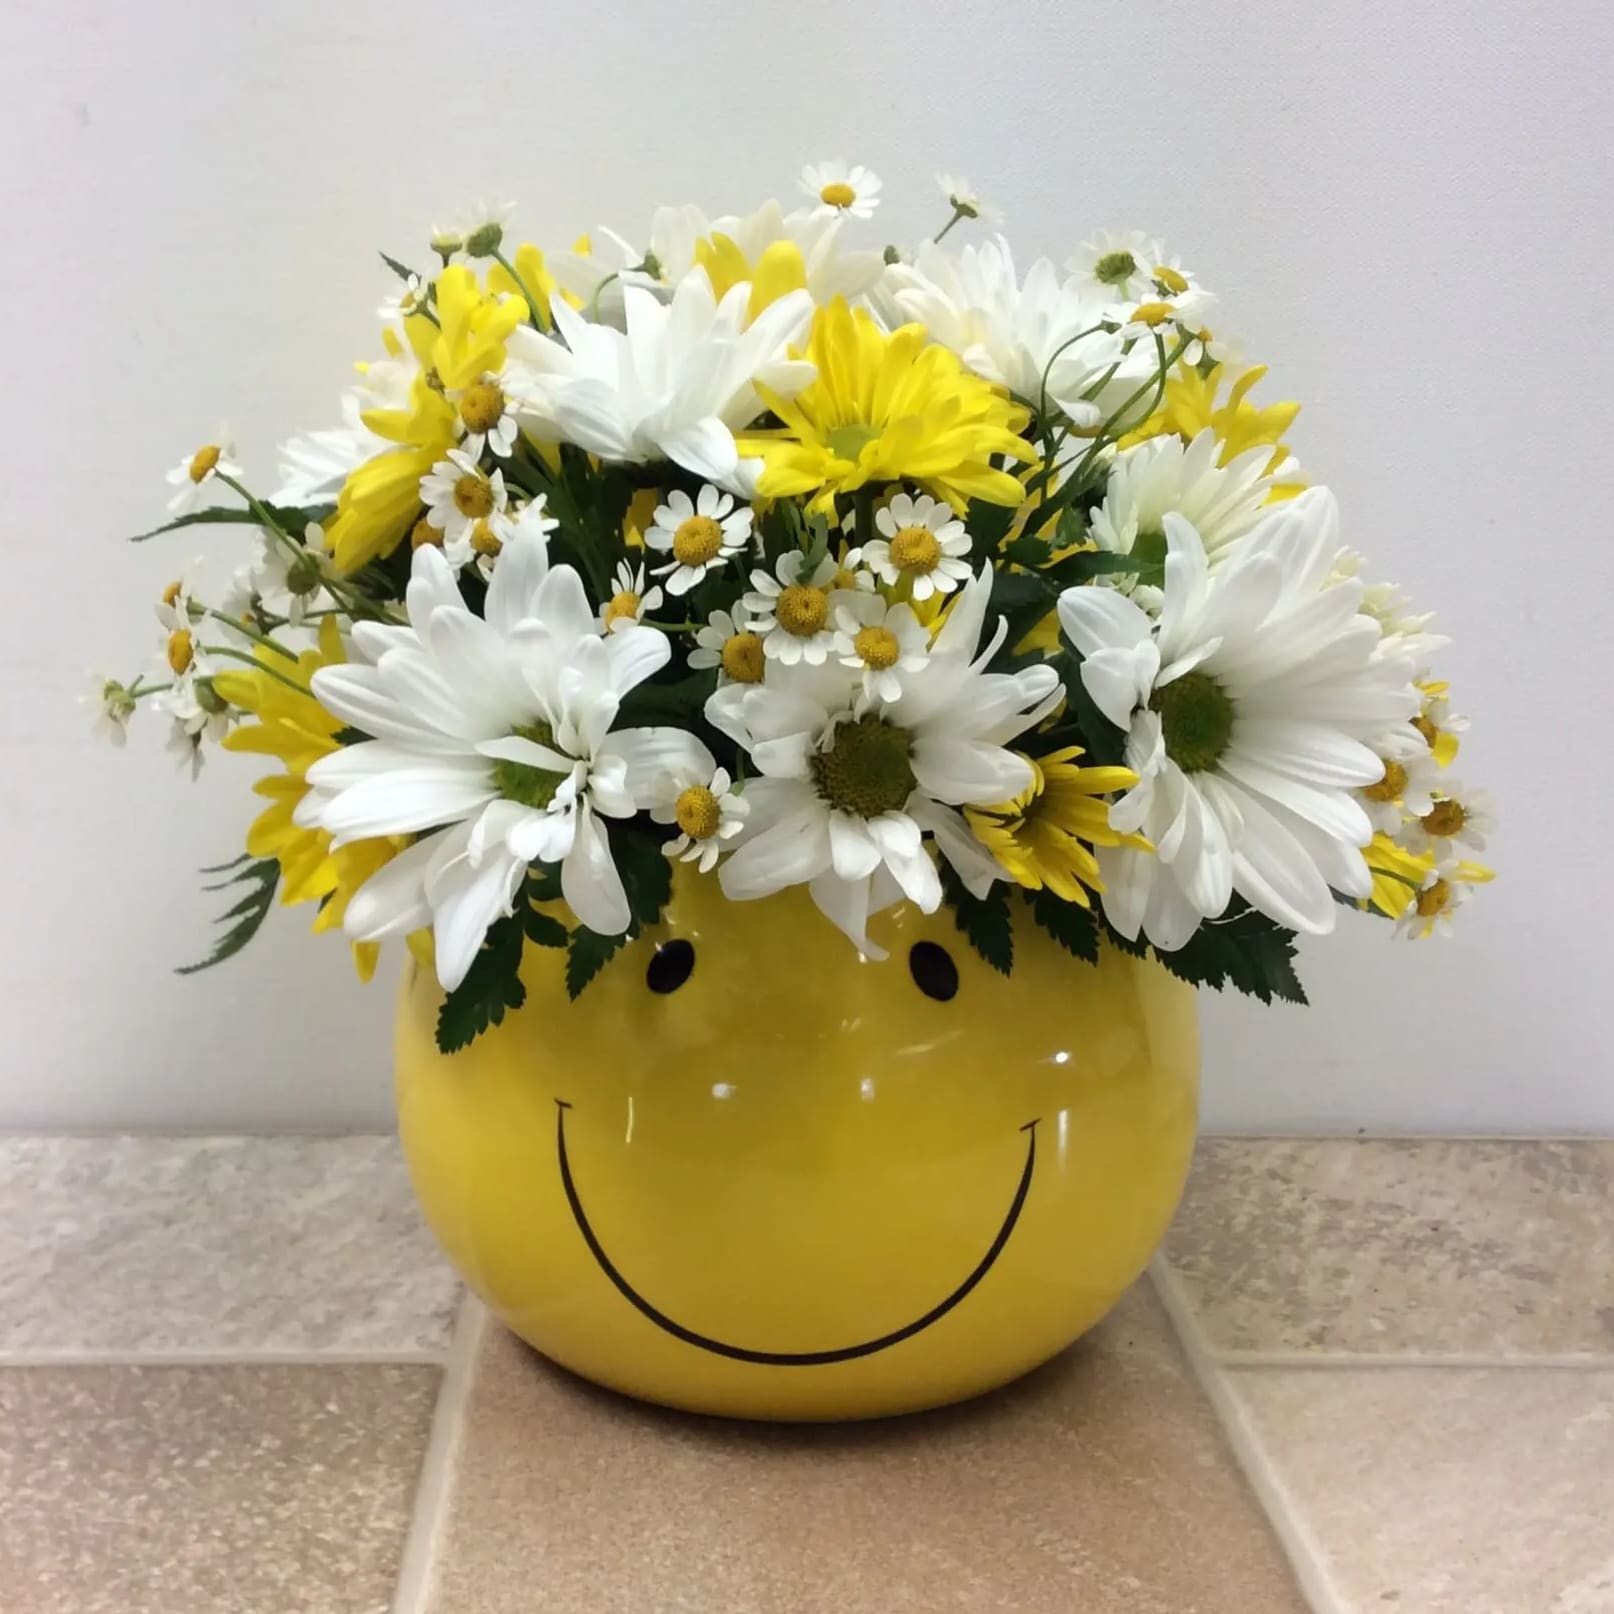 Ernie  - Looking to brighten someone’s day? Look no further! This adorable ceramic smiley face pot filled with yellow and white flowers is sure to do the trick! Perfect for any occasion! 